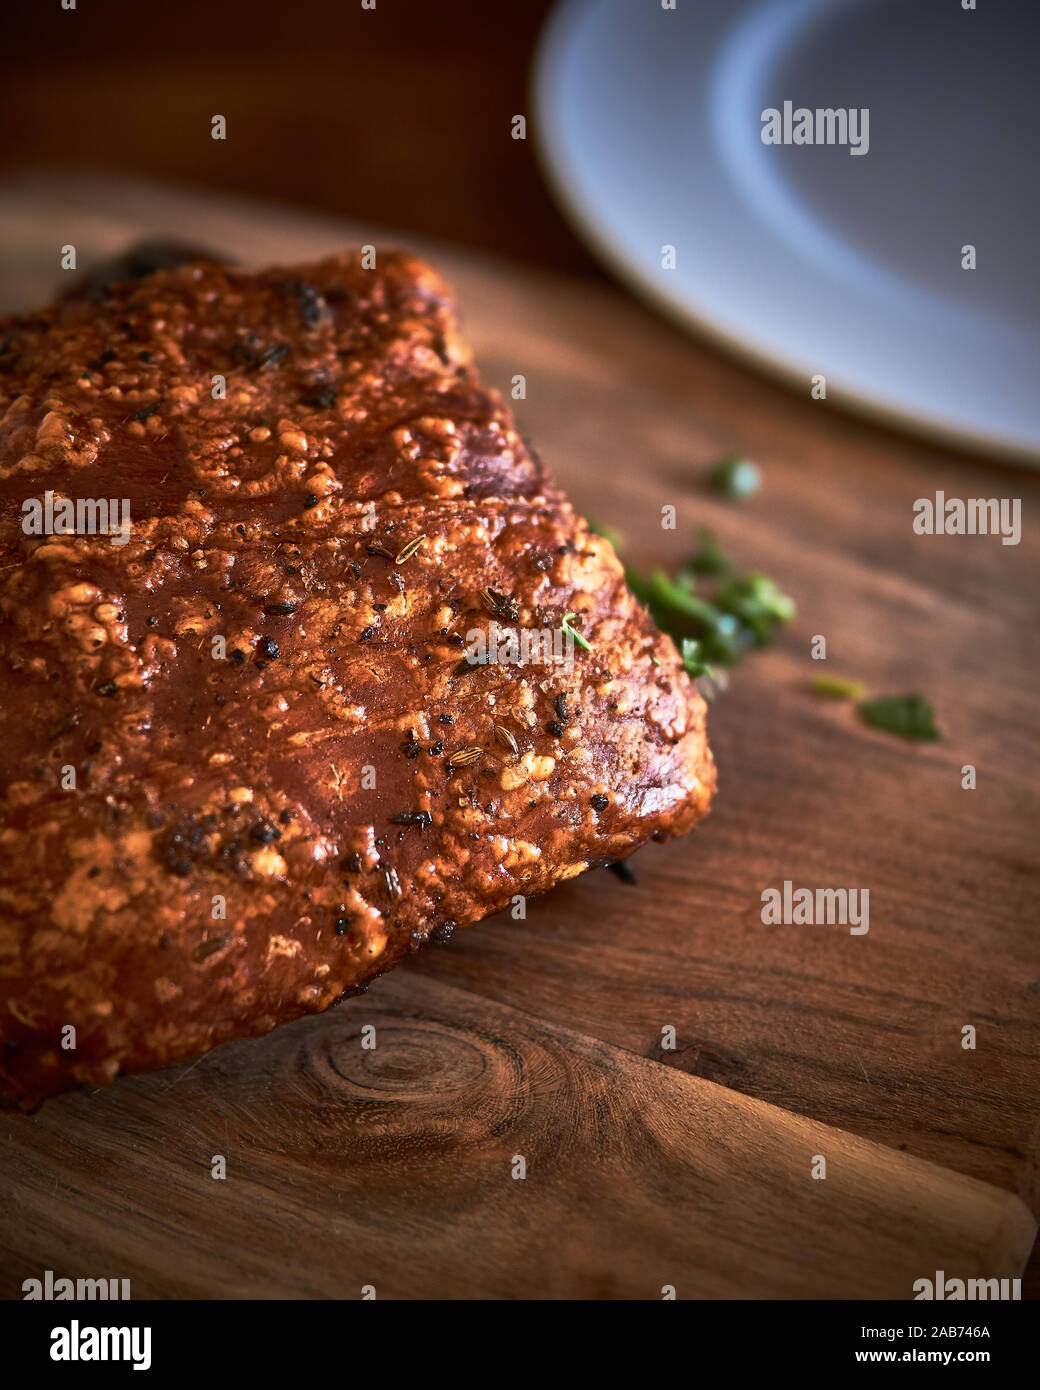 Yummy roasted pork belly with tasty crunchy crackling and parsley. Stock Photo